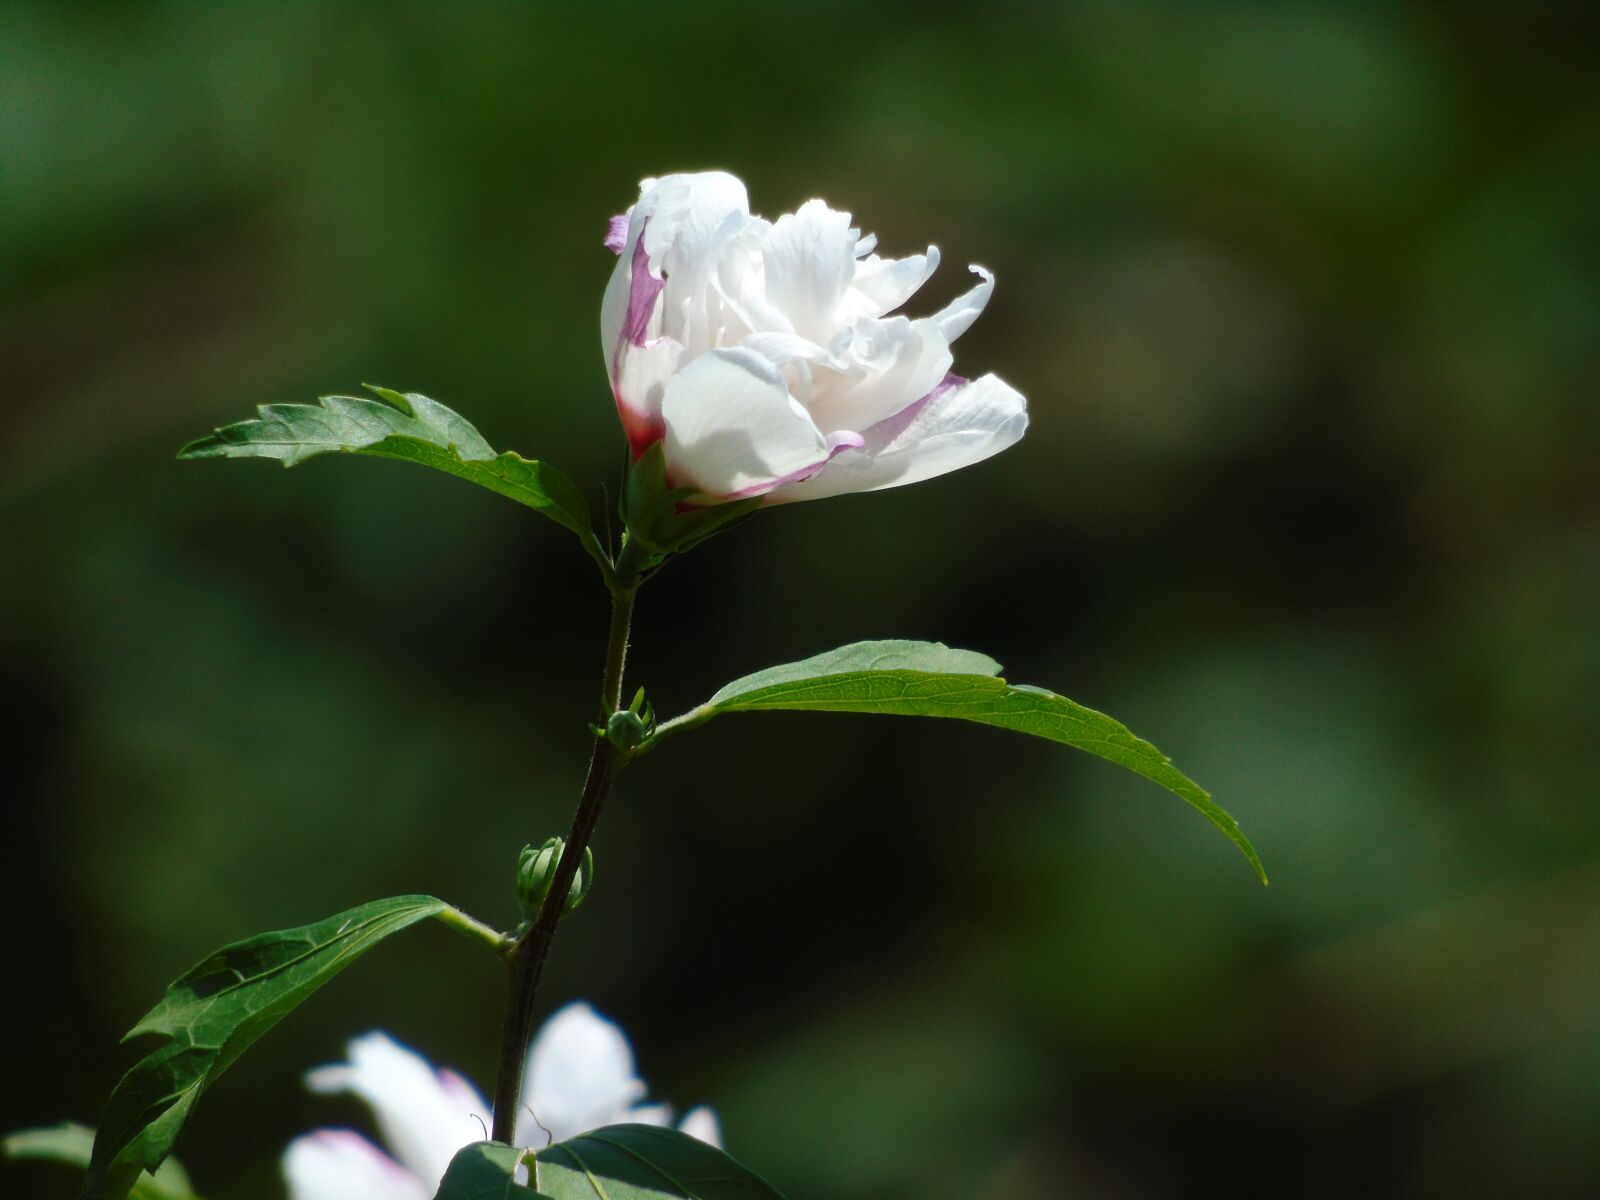 Sony Cyber-shot DSC-H400 sample photo. White flower, beautiful, nature photography